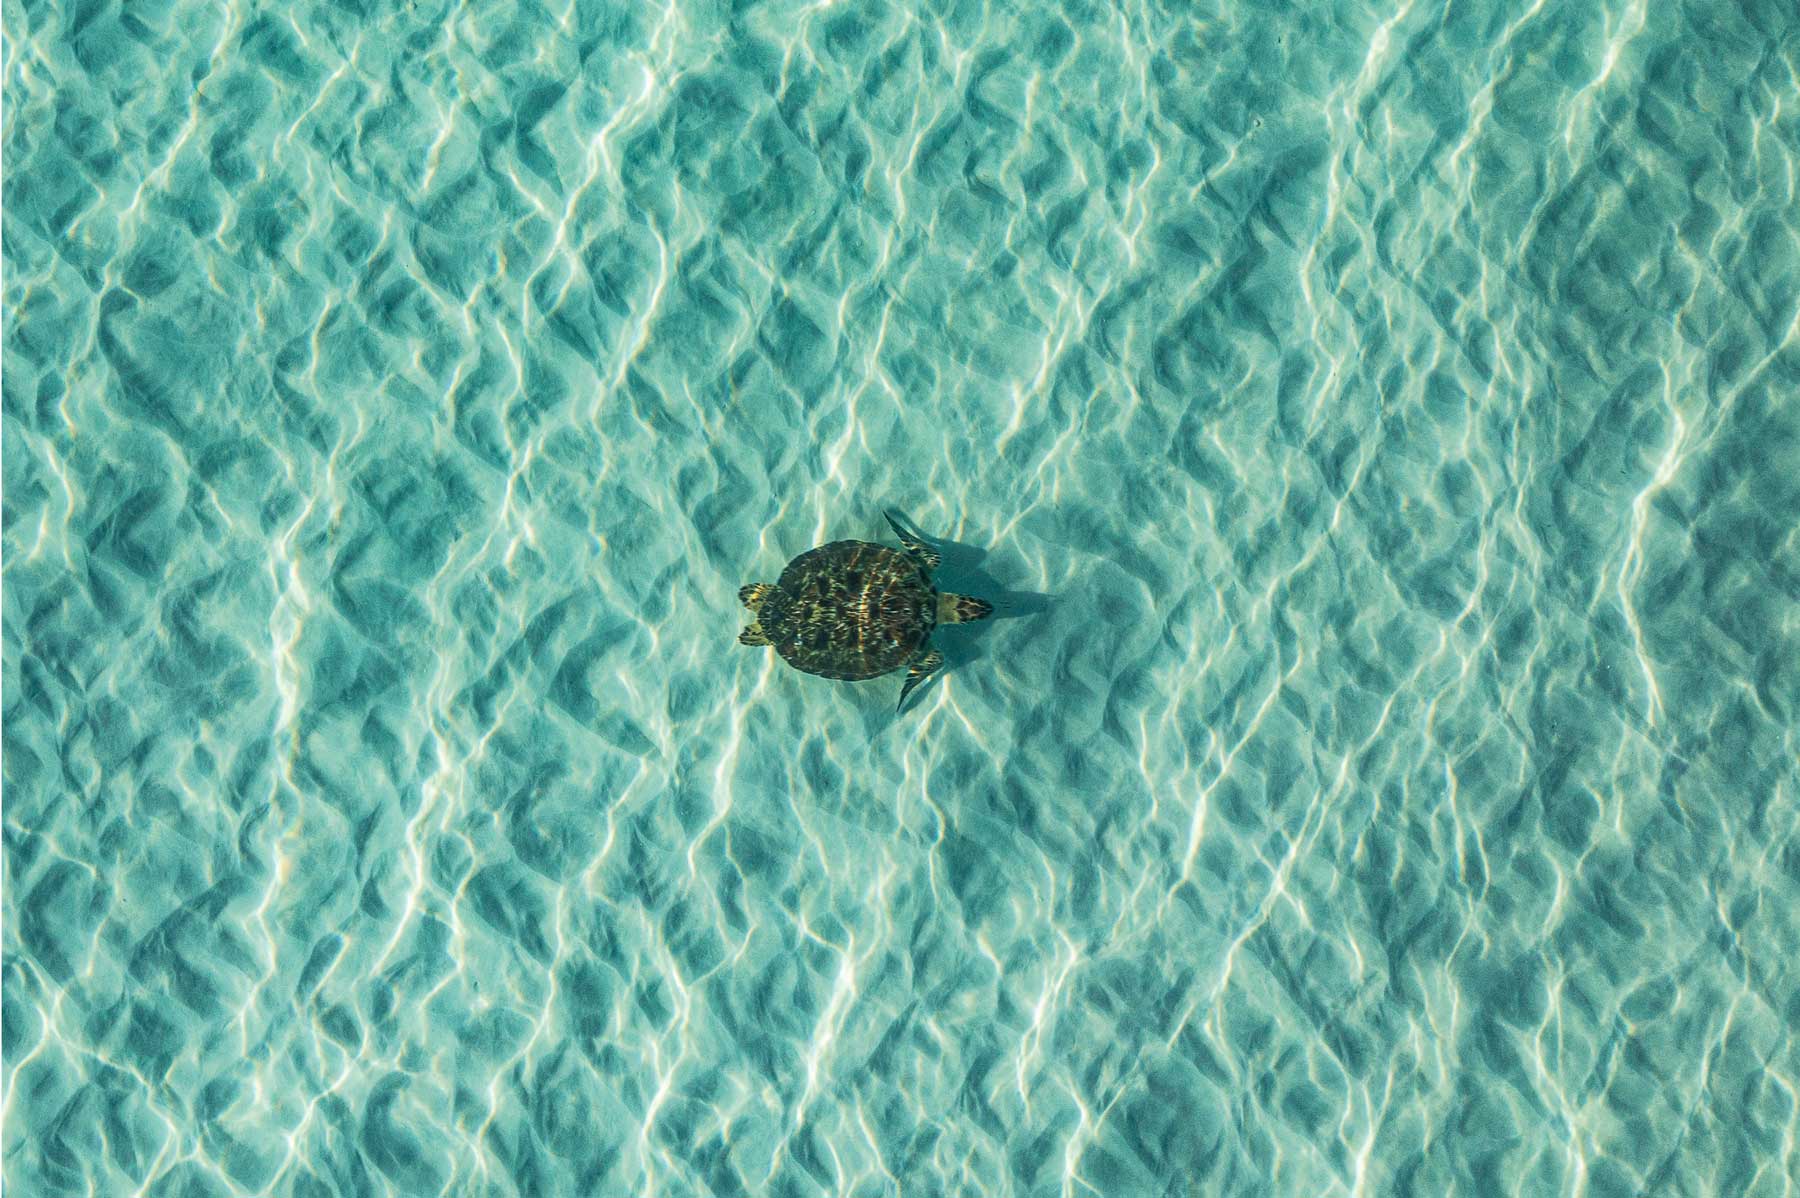 bird's eye view of turtle swimming in turquoise water